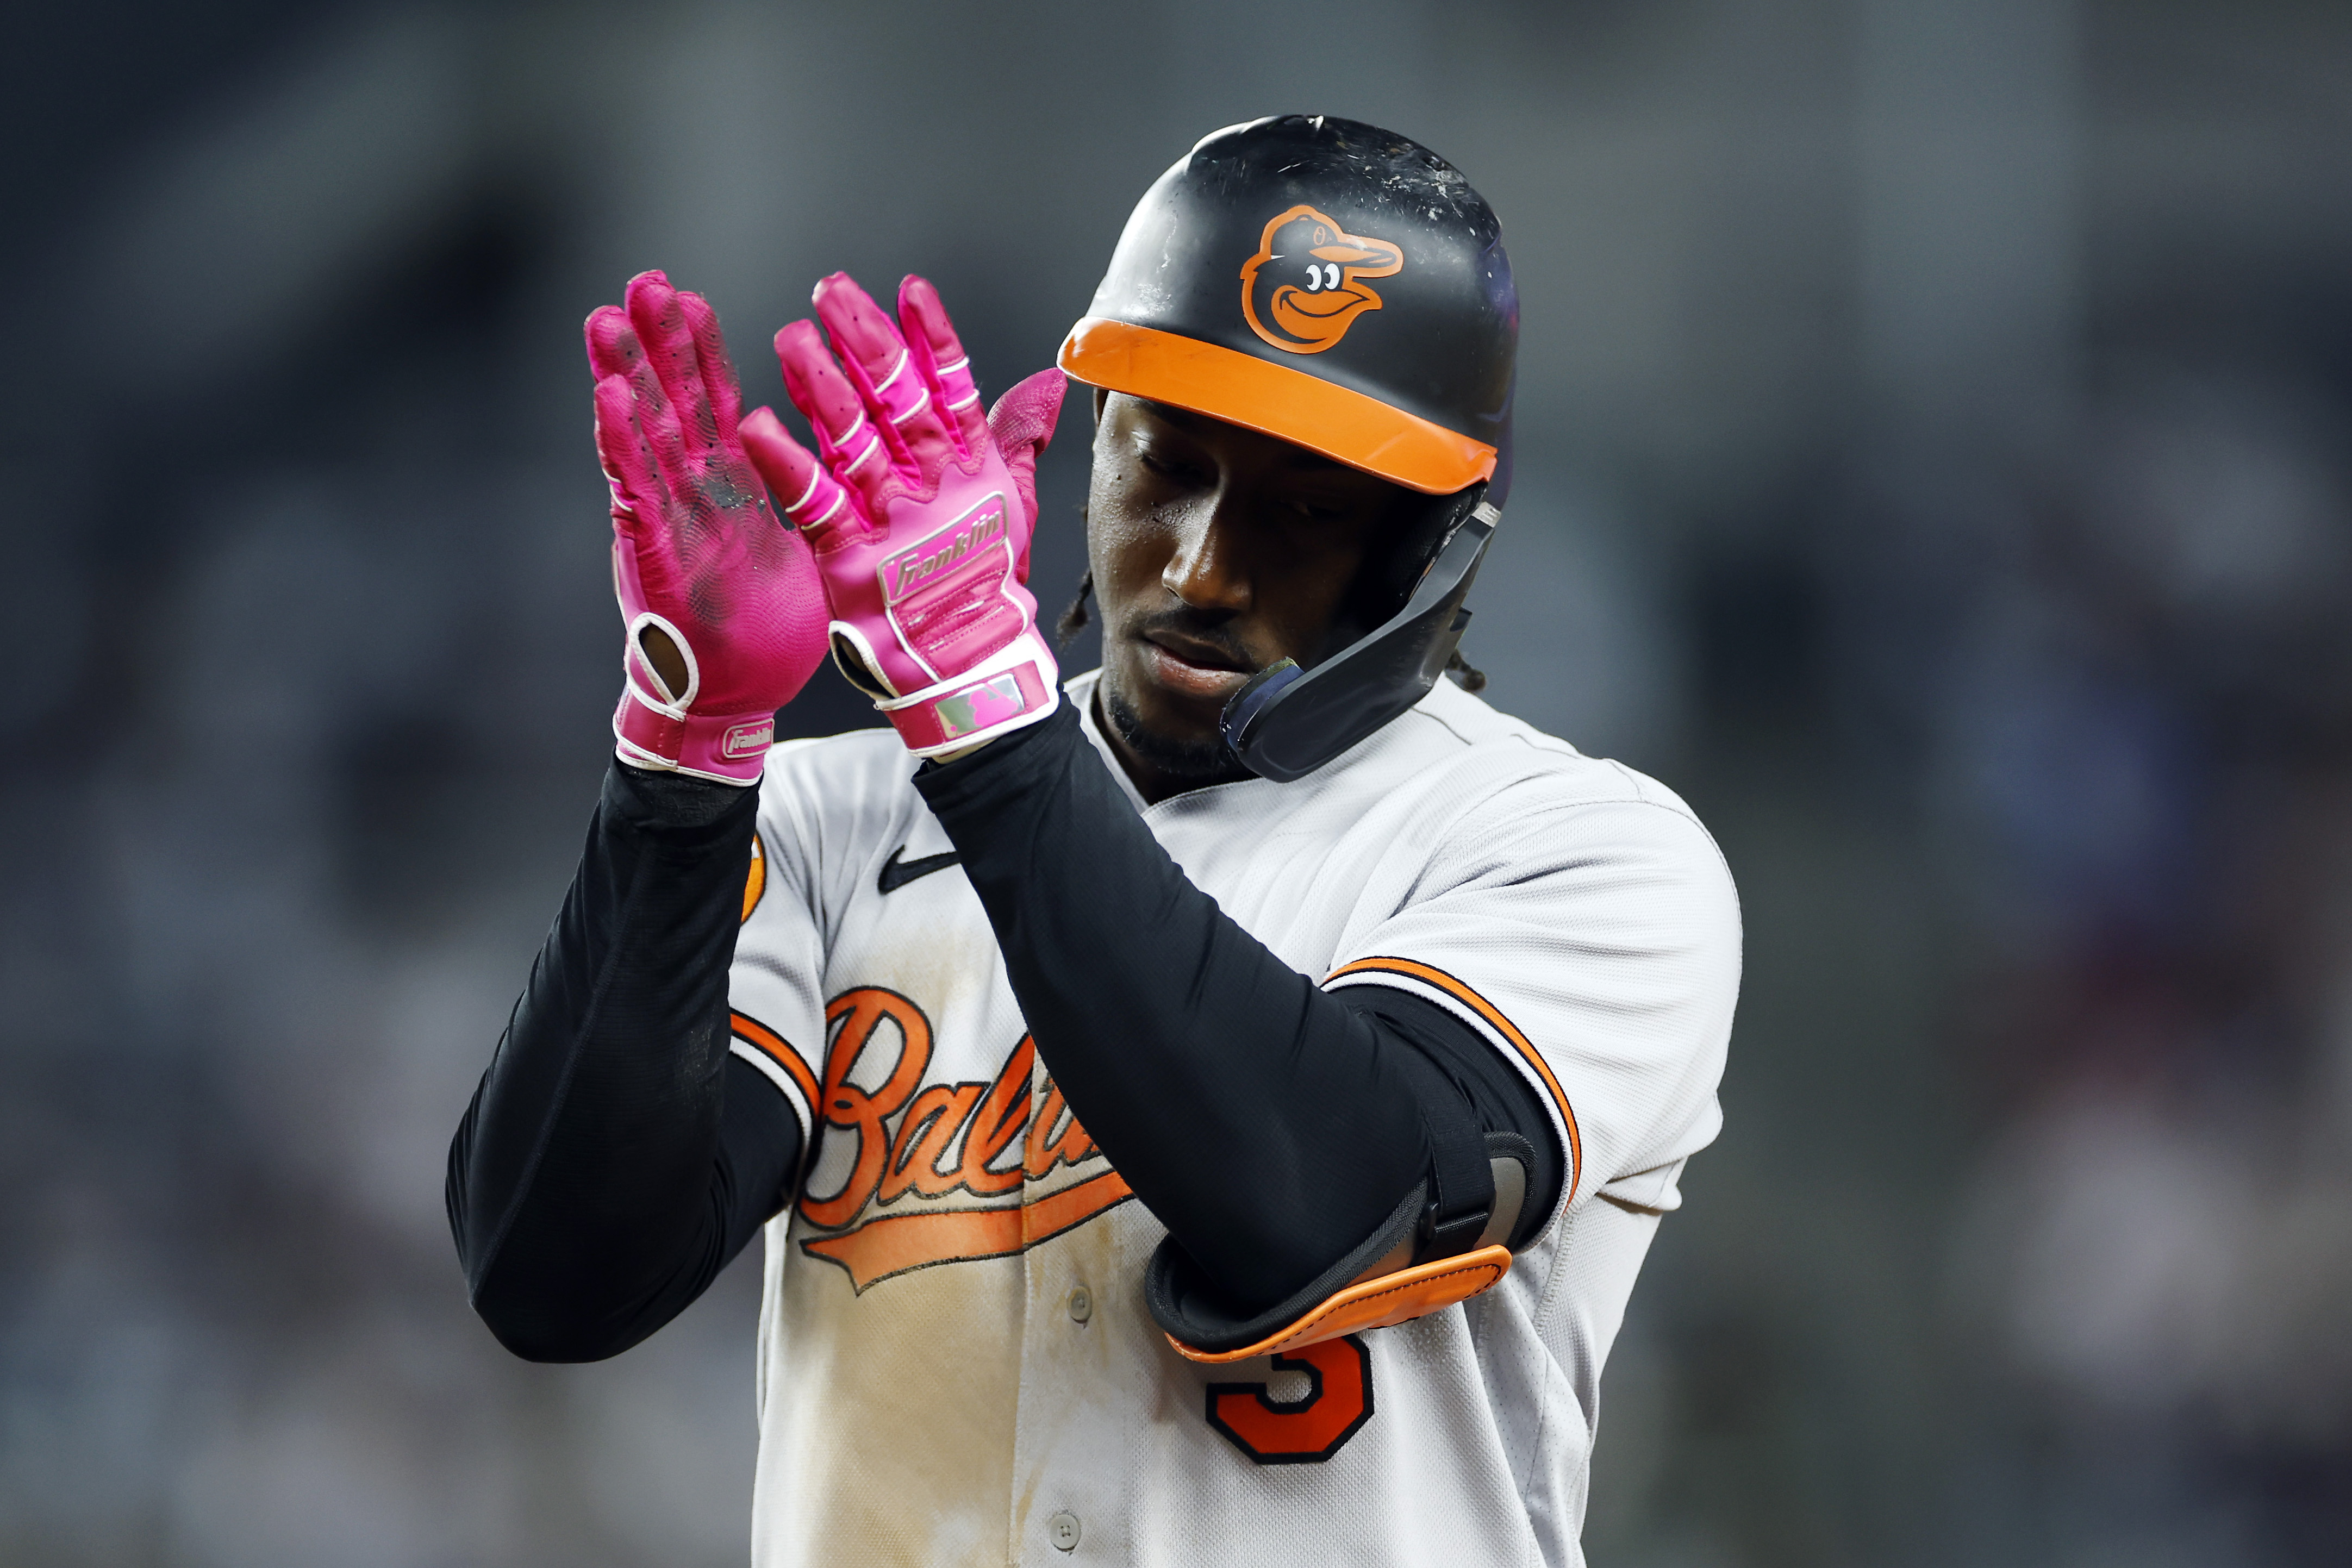 Orioles score 8 runs in 7th to beat Yankees, Nestor Cortes struggles late